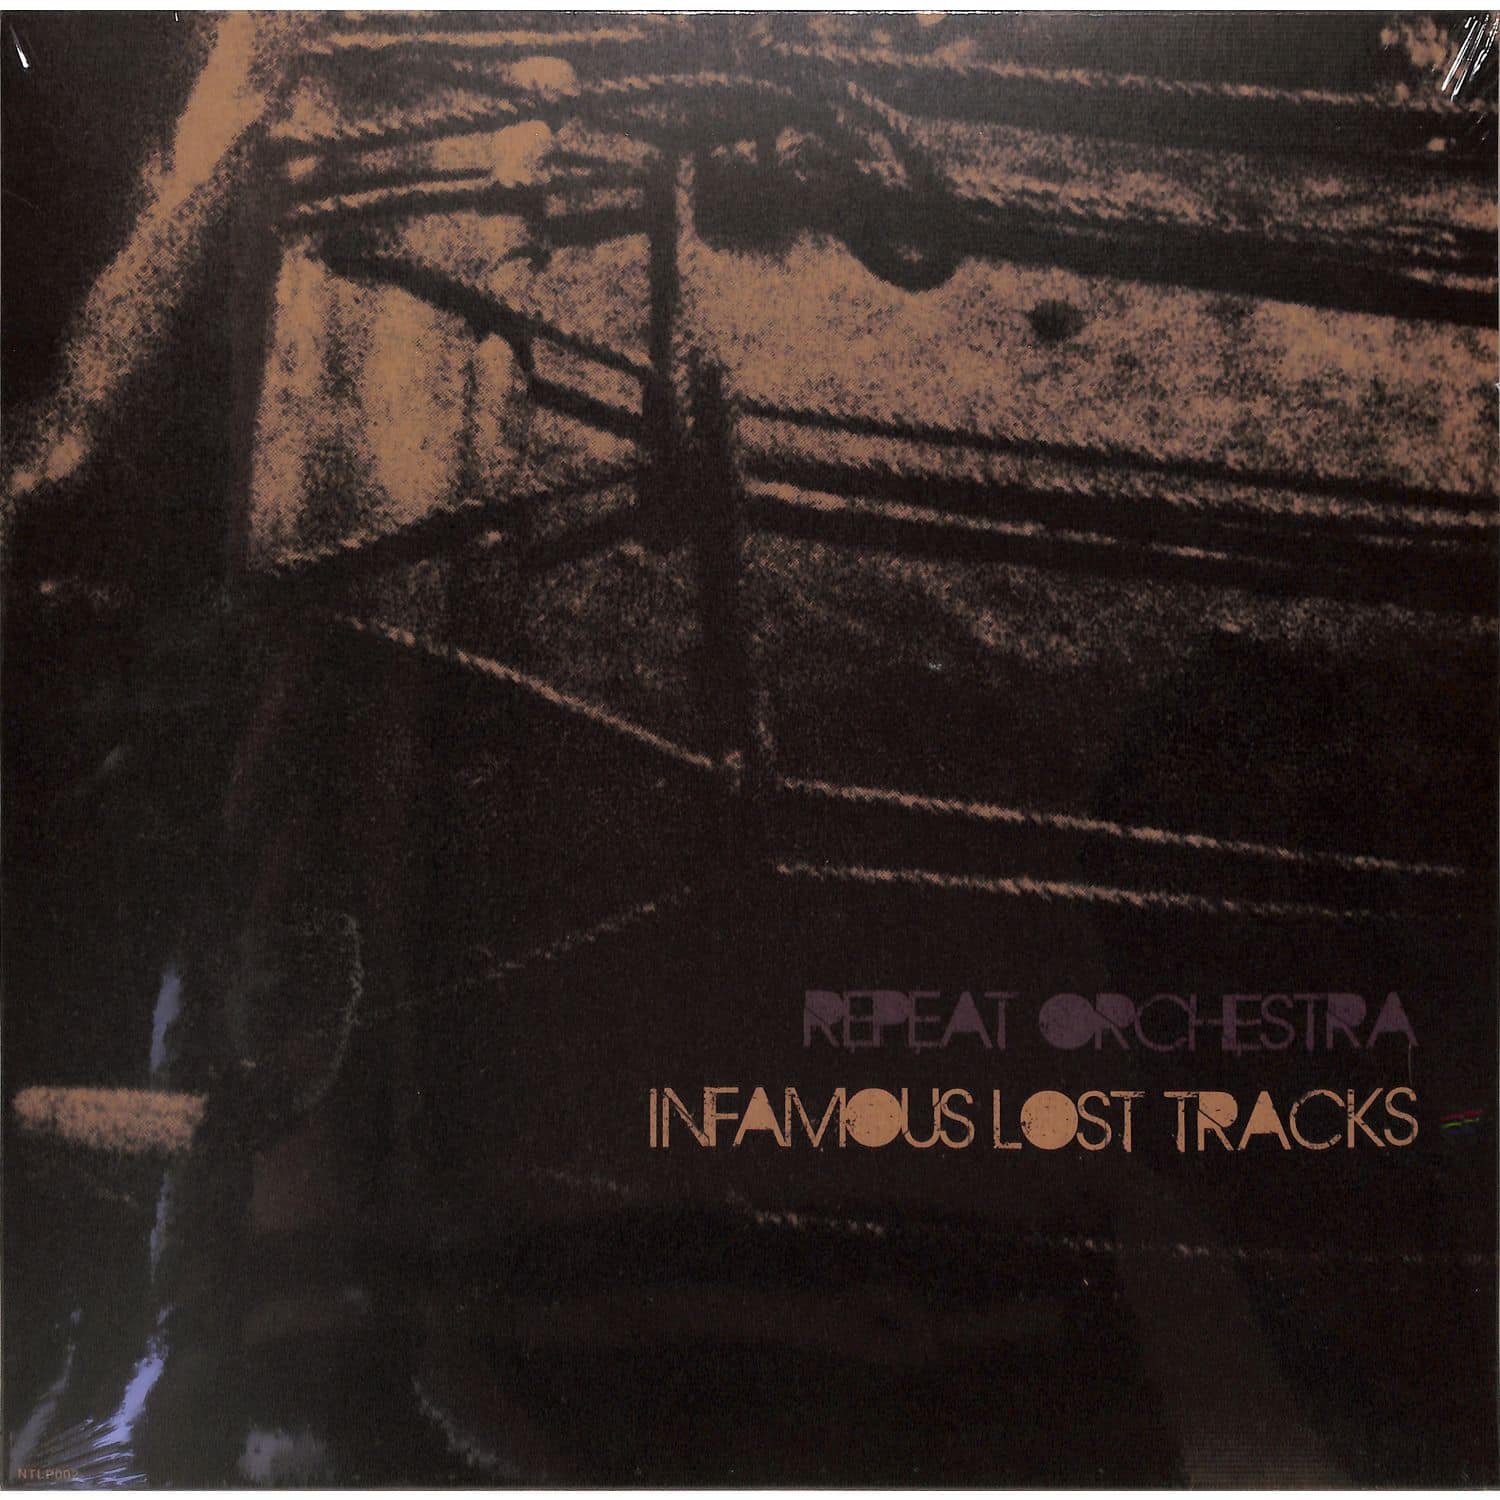 Repeat Orchestra - INFAMOUS LOST TRACKS 